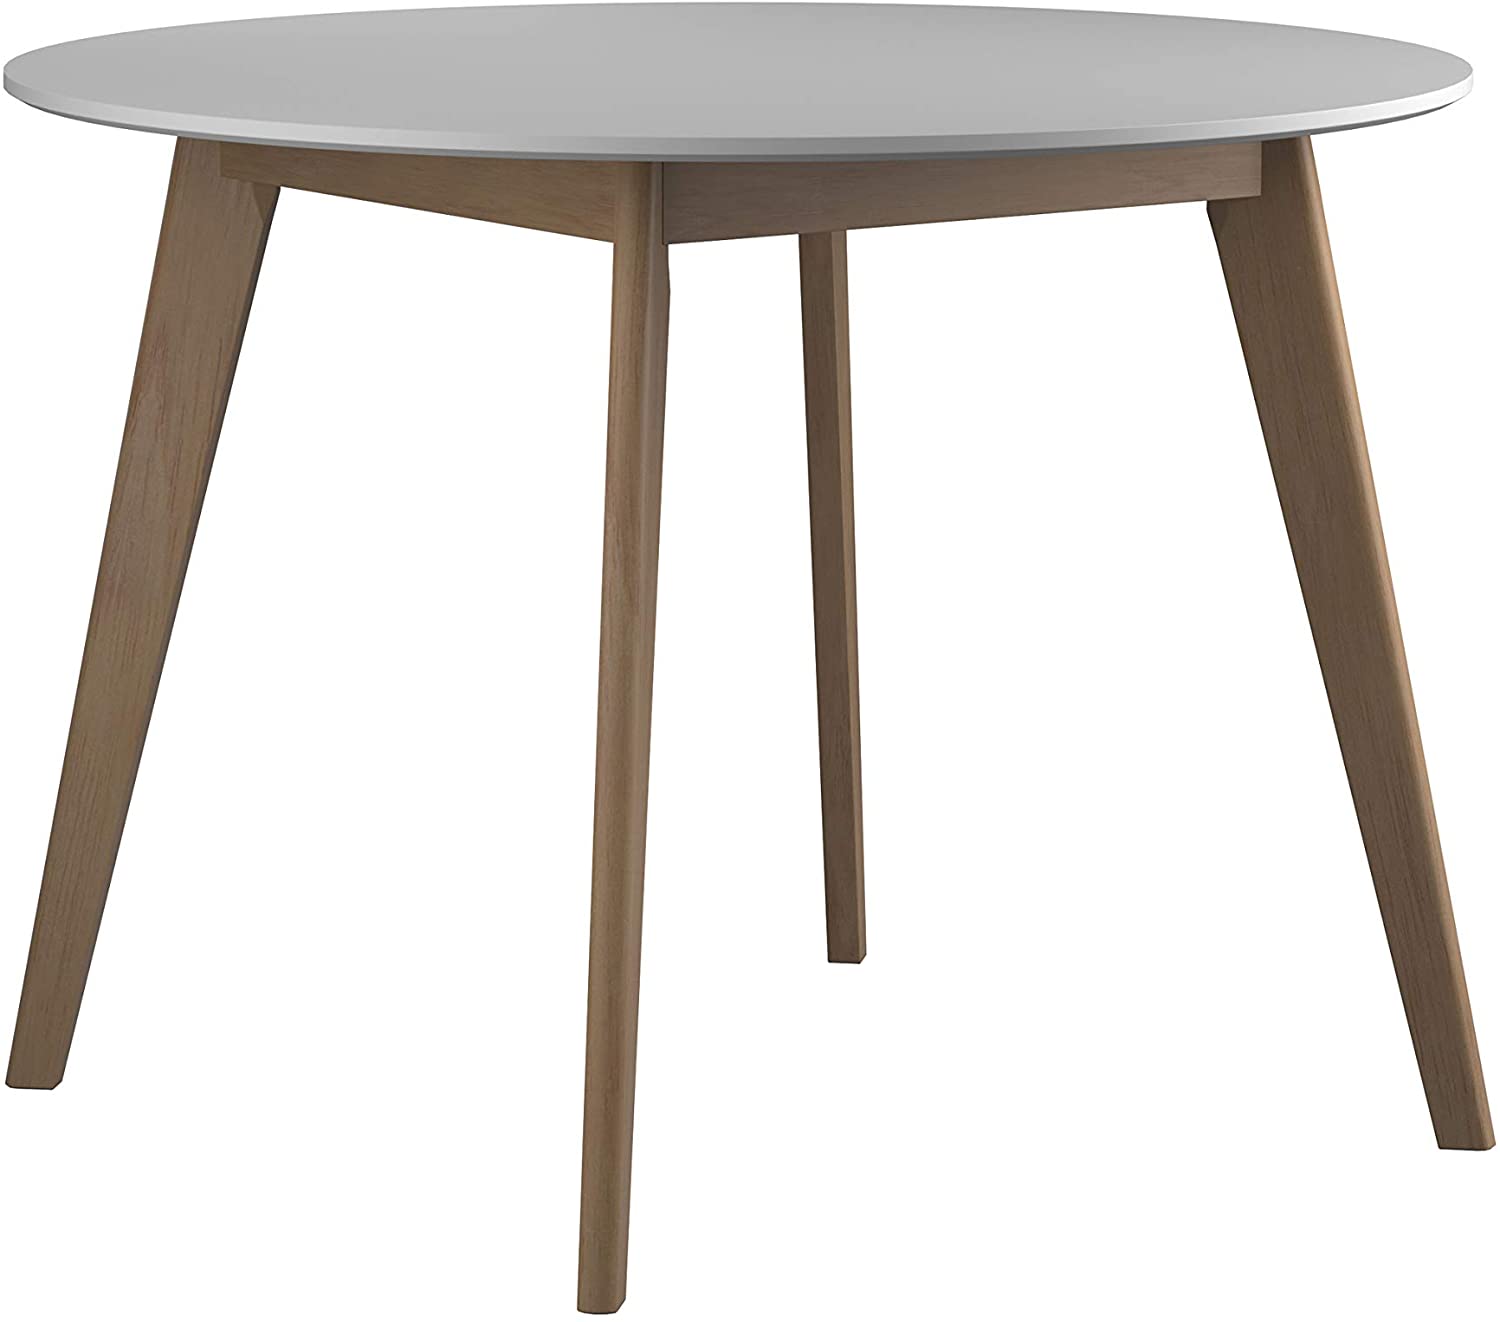 B08FT4J4D9 Coaster Home Furnishings Breckenridge Round Matte White and Natural Oak Dining Table